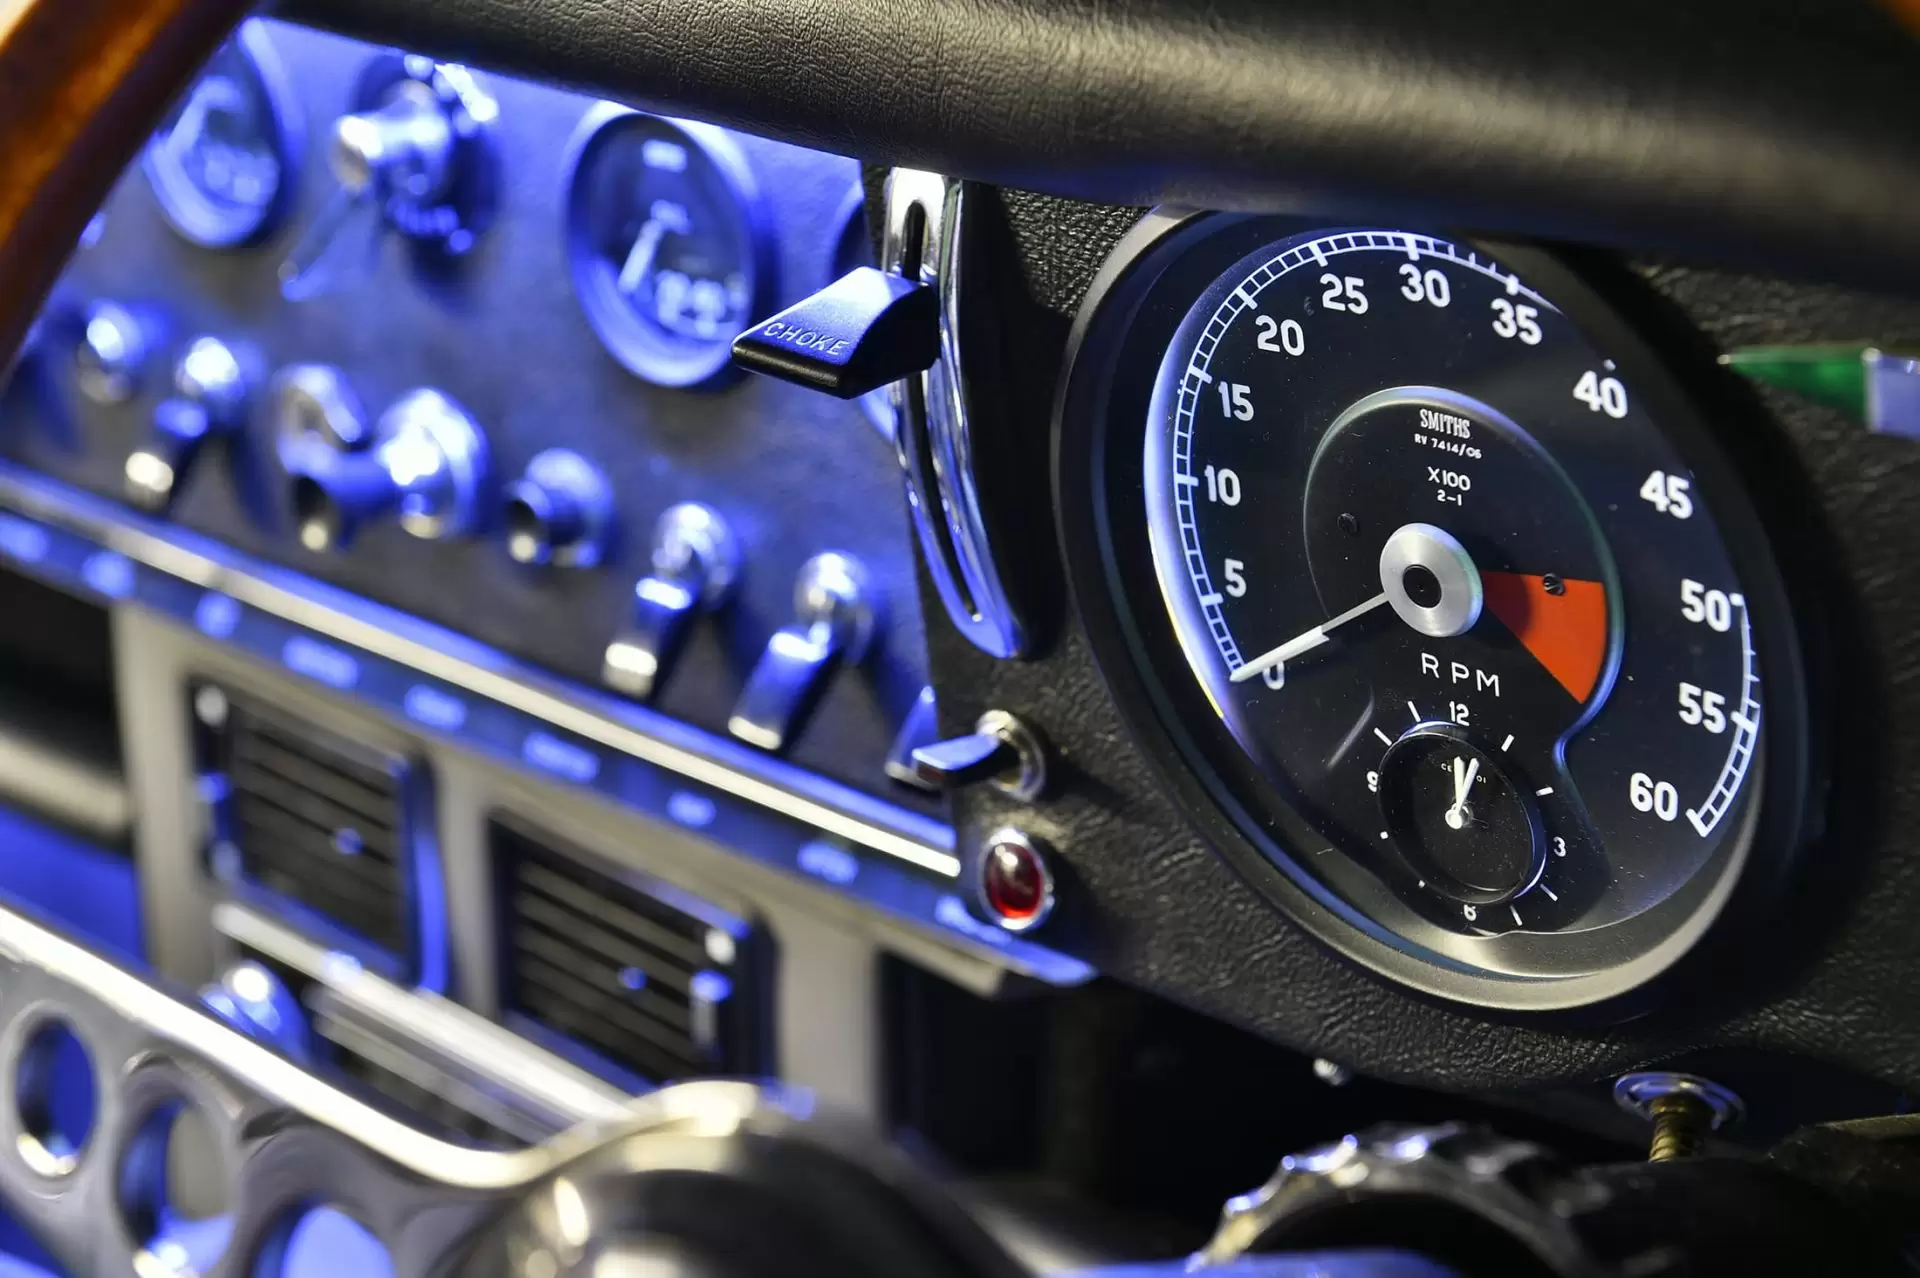 LED lighting on dashboard and dials of Jaguar E Type